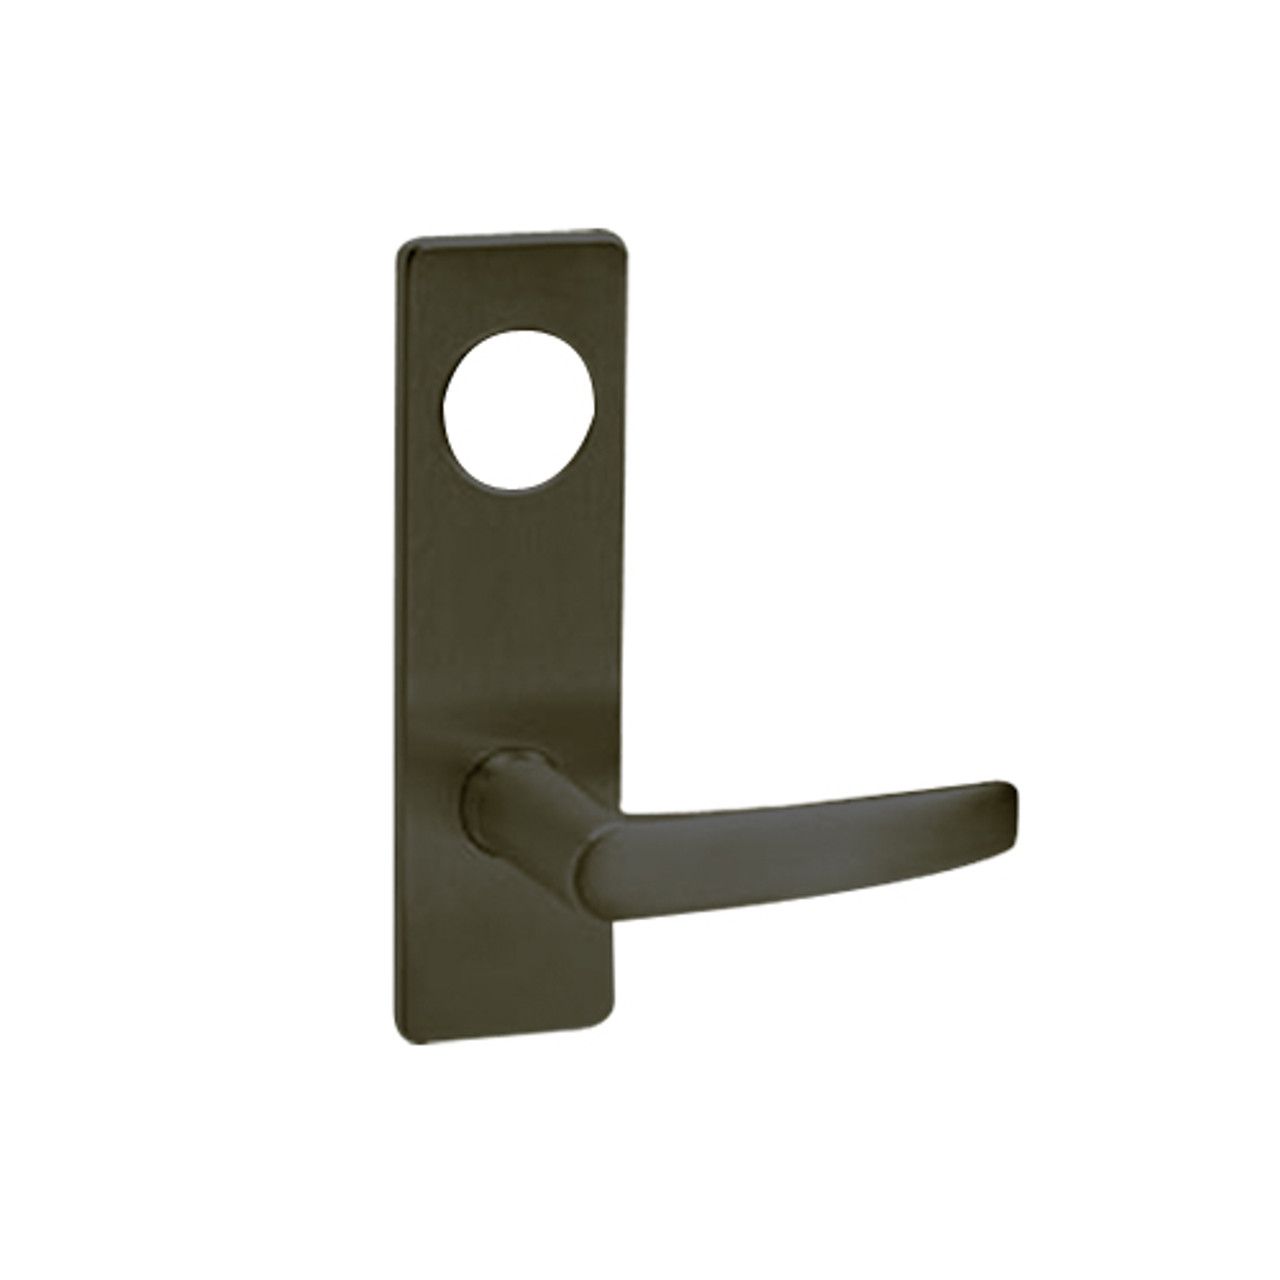 ML2055-ASP-613-LC Corbin Russwin ML2000 Series Mortise Classroom Locksets with Armstrong Lever in Oil Rubbed Bronze